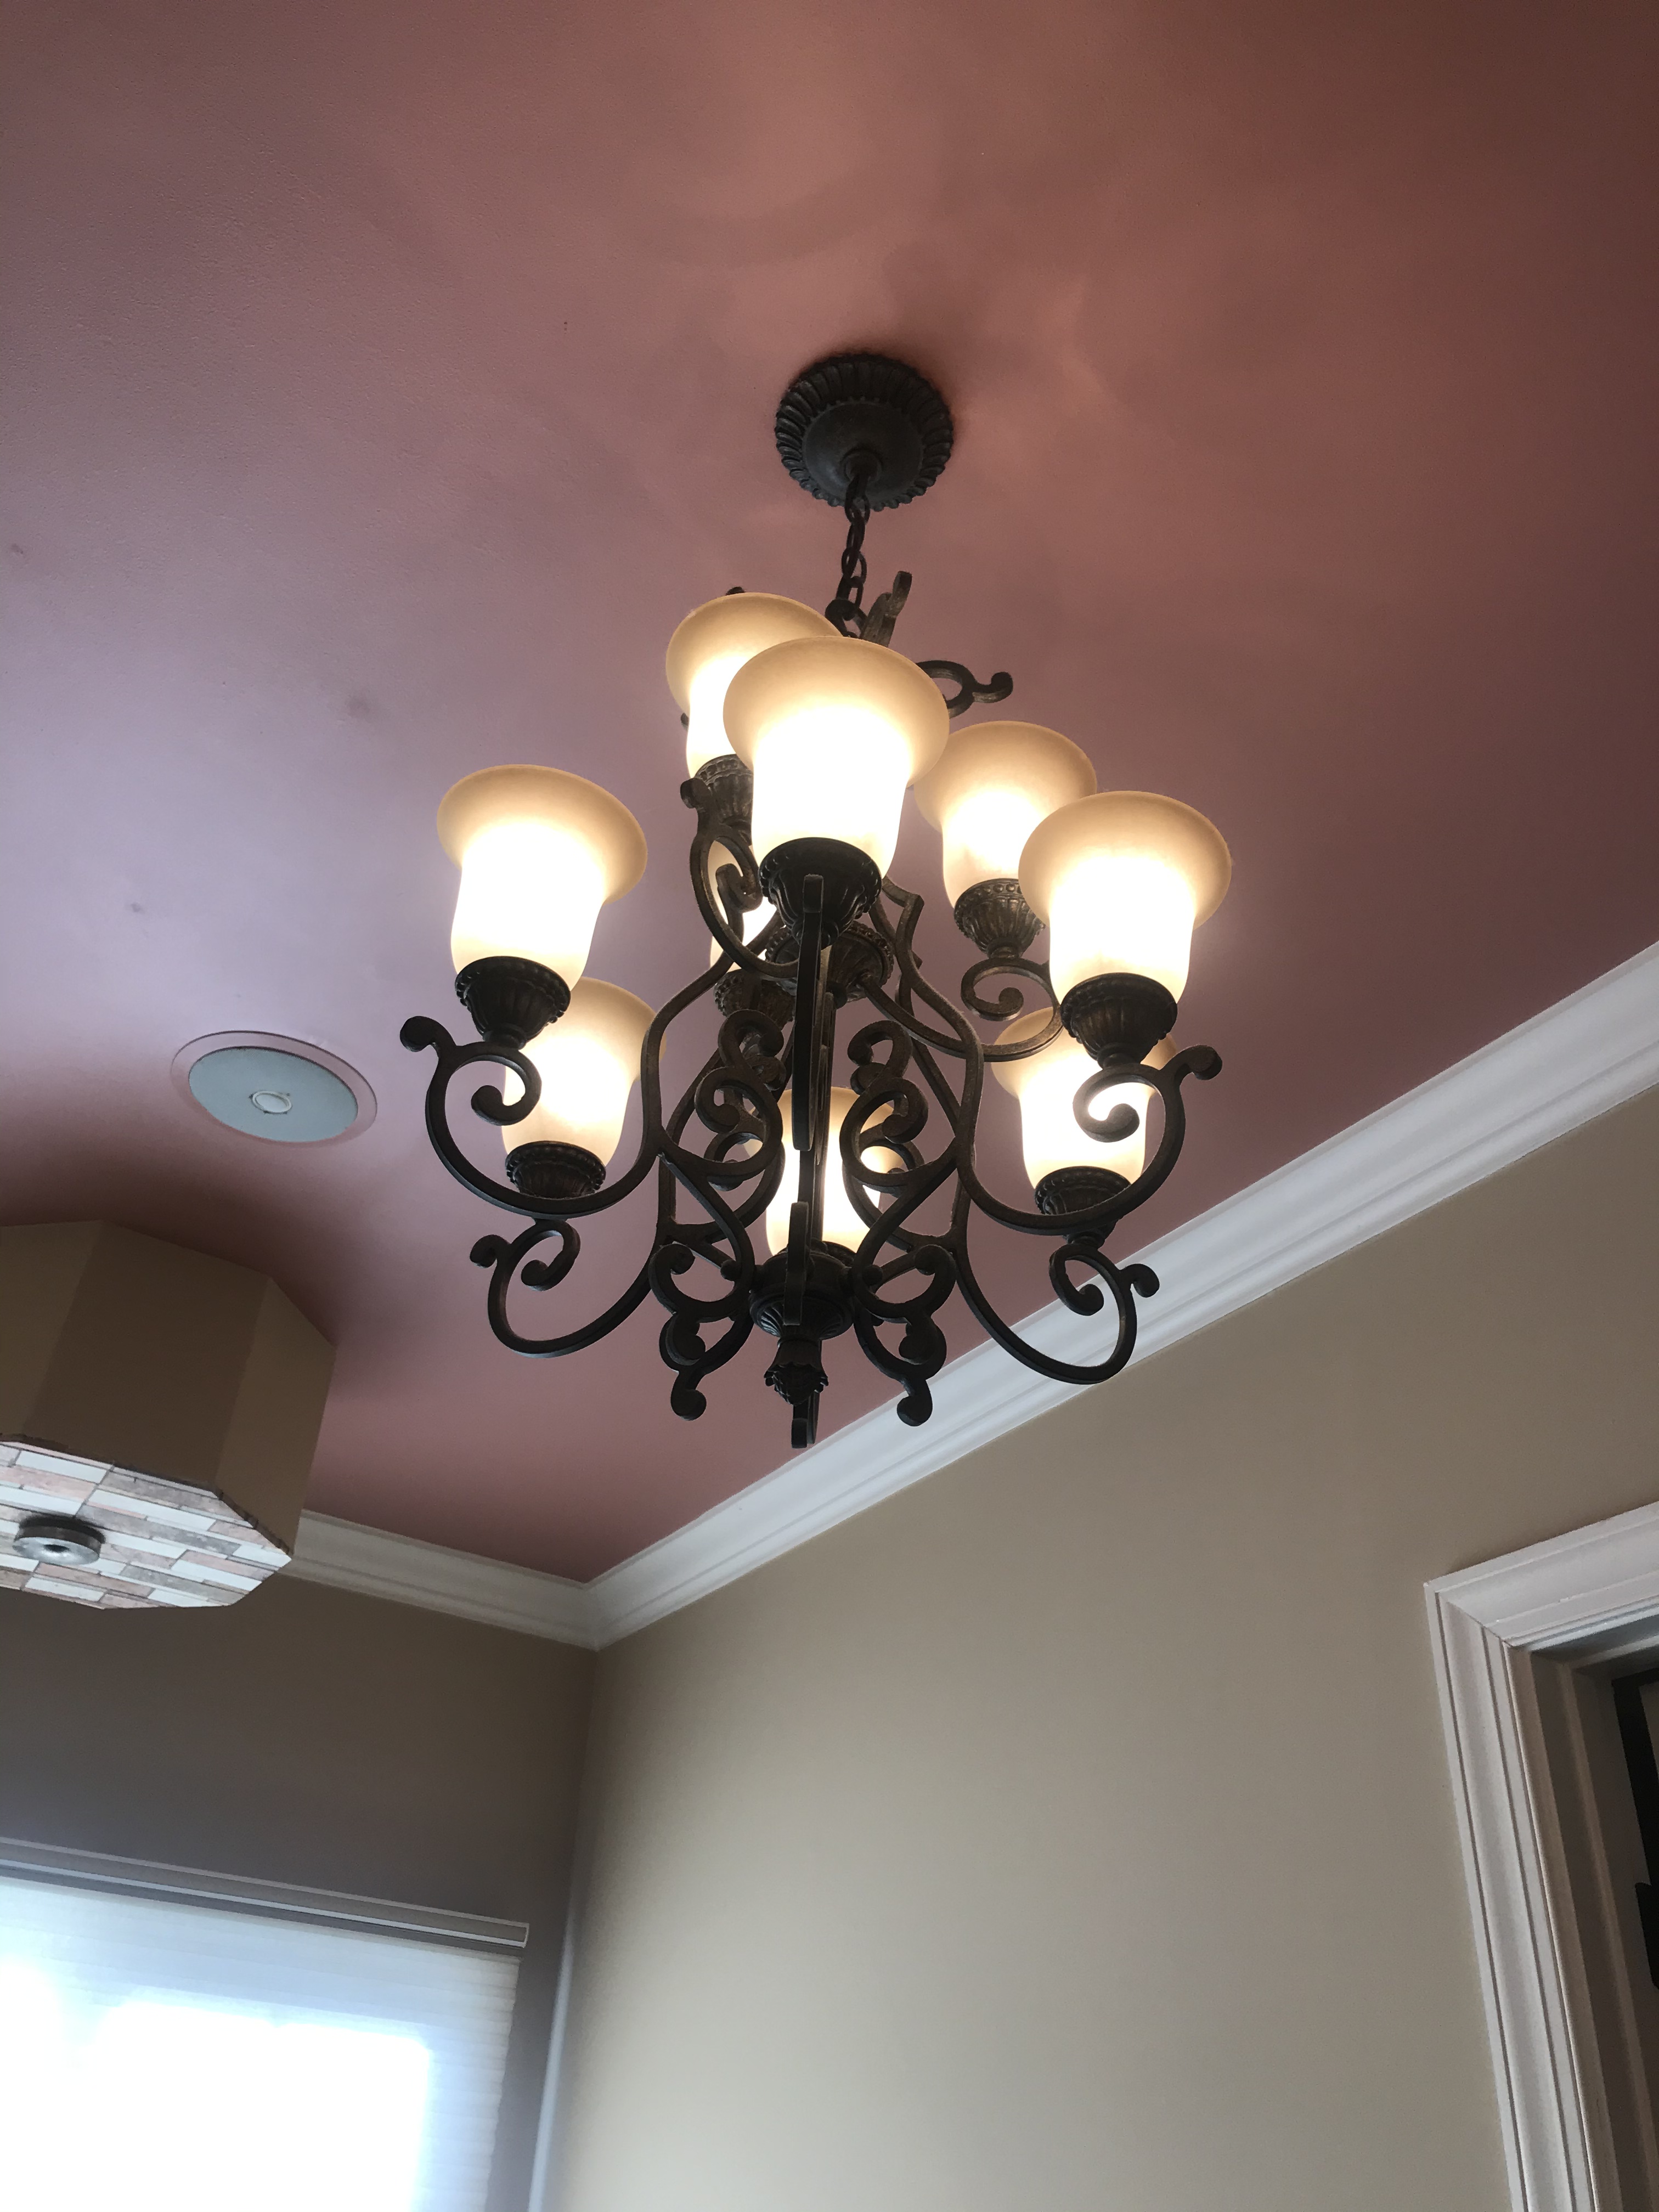 Electrical Outlet and Lighting Installation in Gainesville, VA